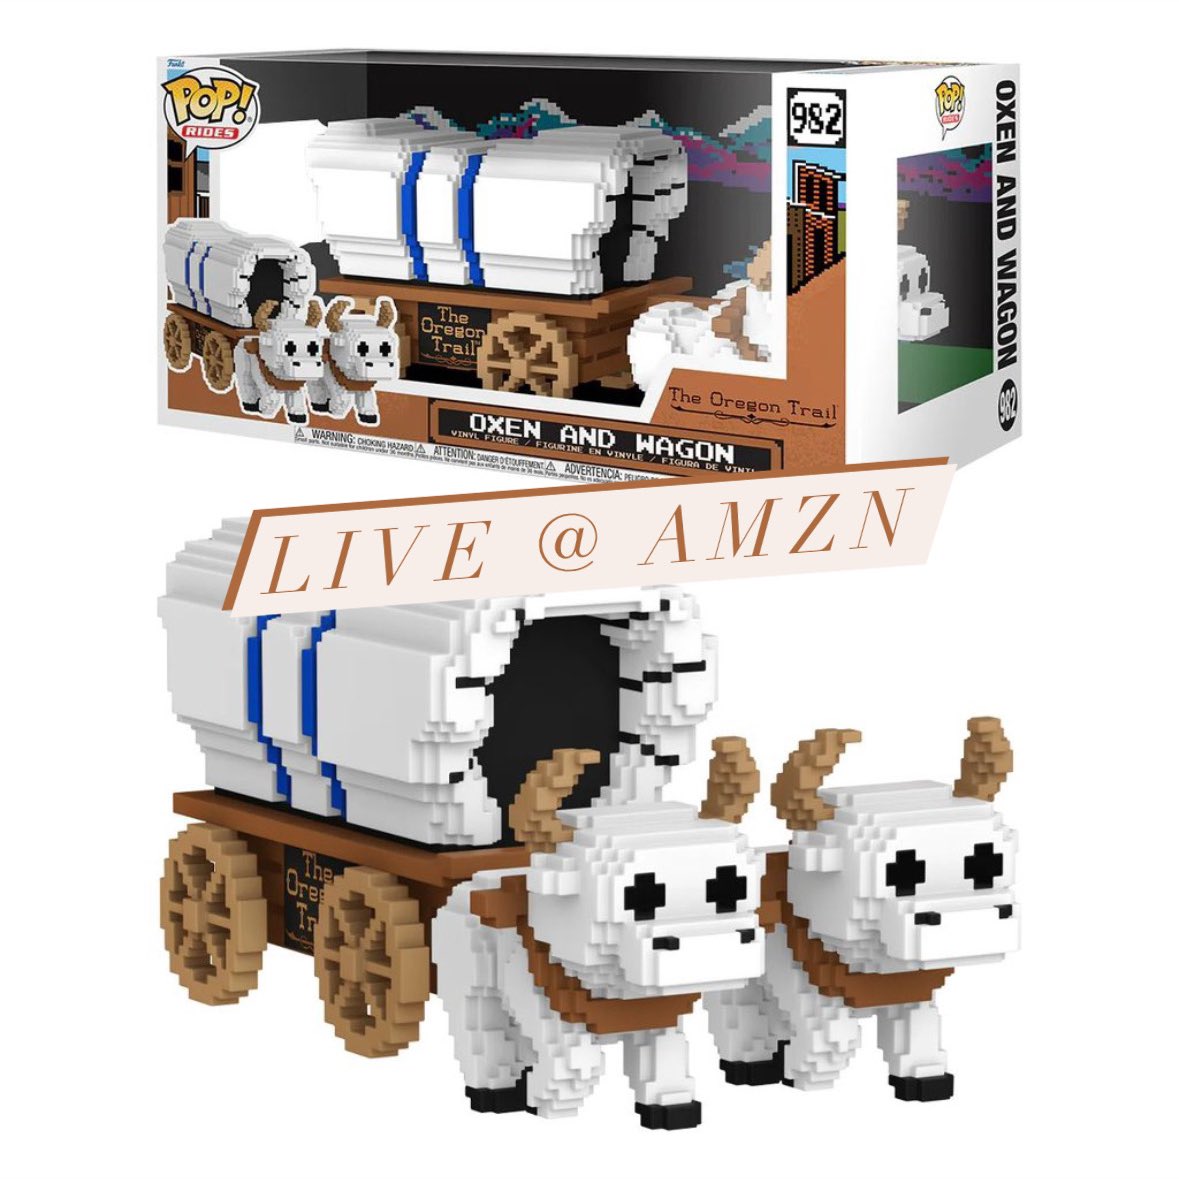 Now live! Relive the 8-Bit Era with the new Oxen and Wagon Funko POP! Ride ~ available at Amazon below!
Linky ~ amzn.to/3ycJUwH
#Ad #OregonTrail #FPN #FunkoPOPNews #Funko #POP #POPVinyl #FunkoPOP #FunkoSoda